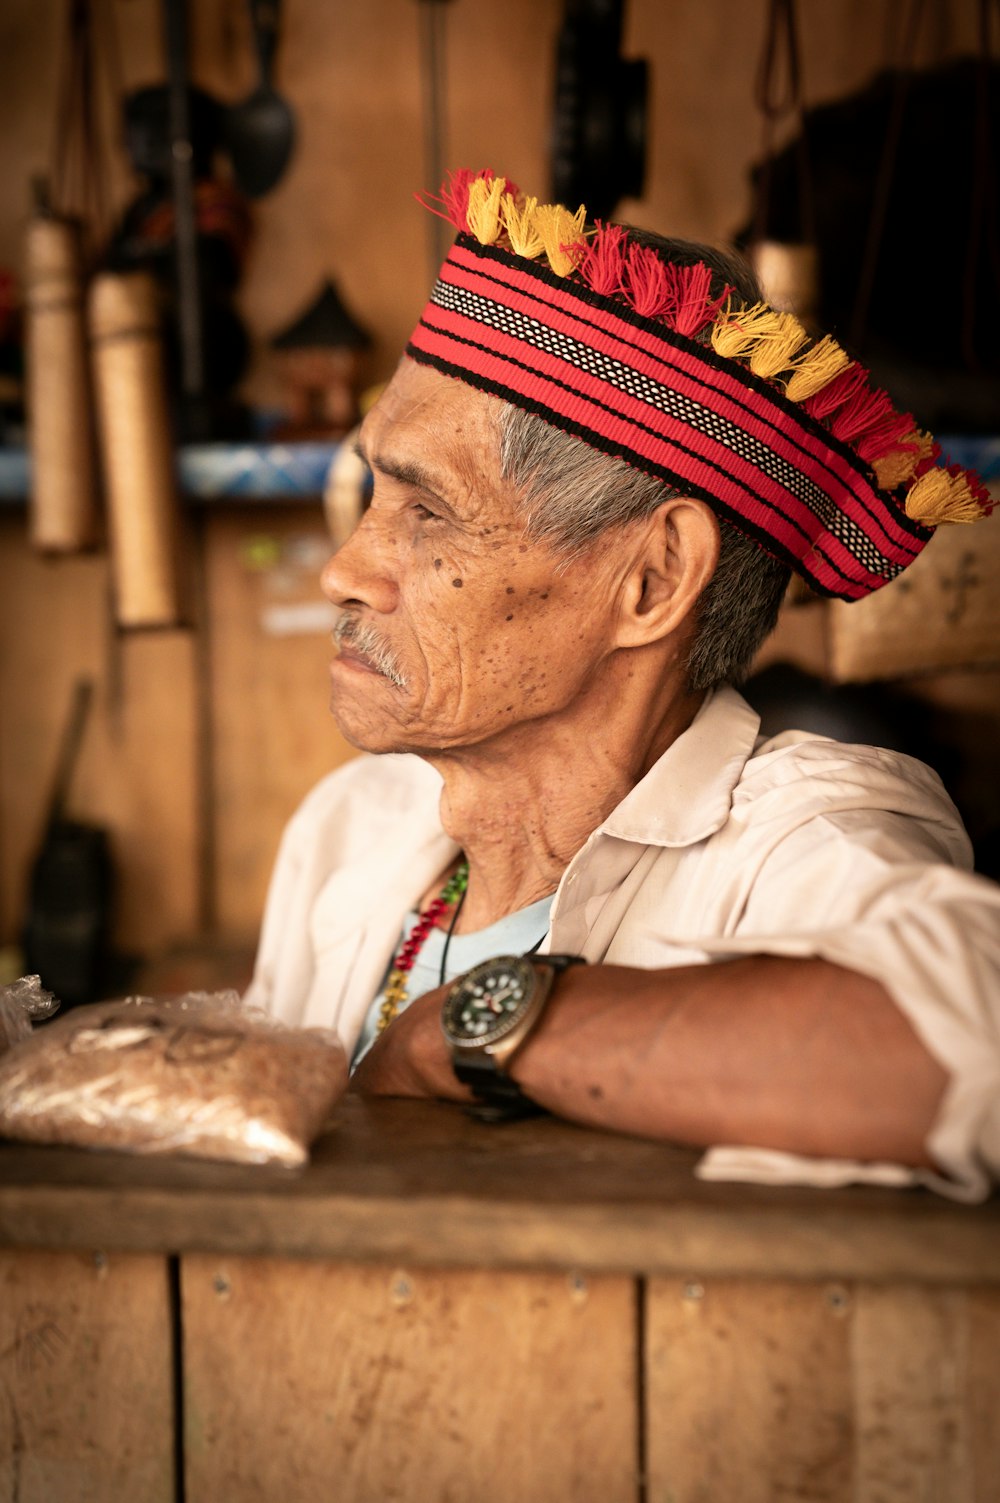 a man wearing a colorful headdress sitting at a counter